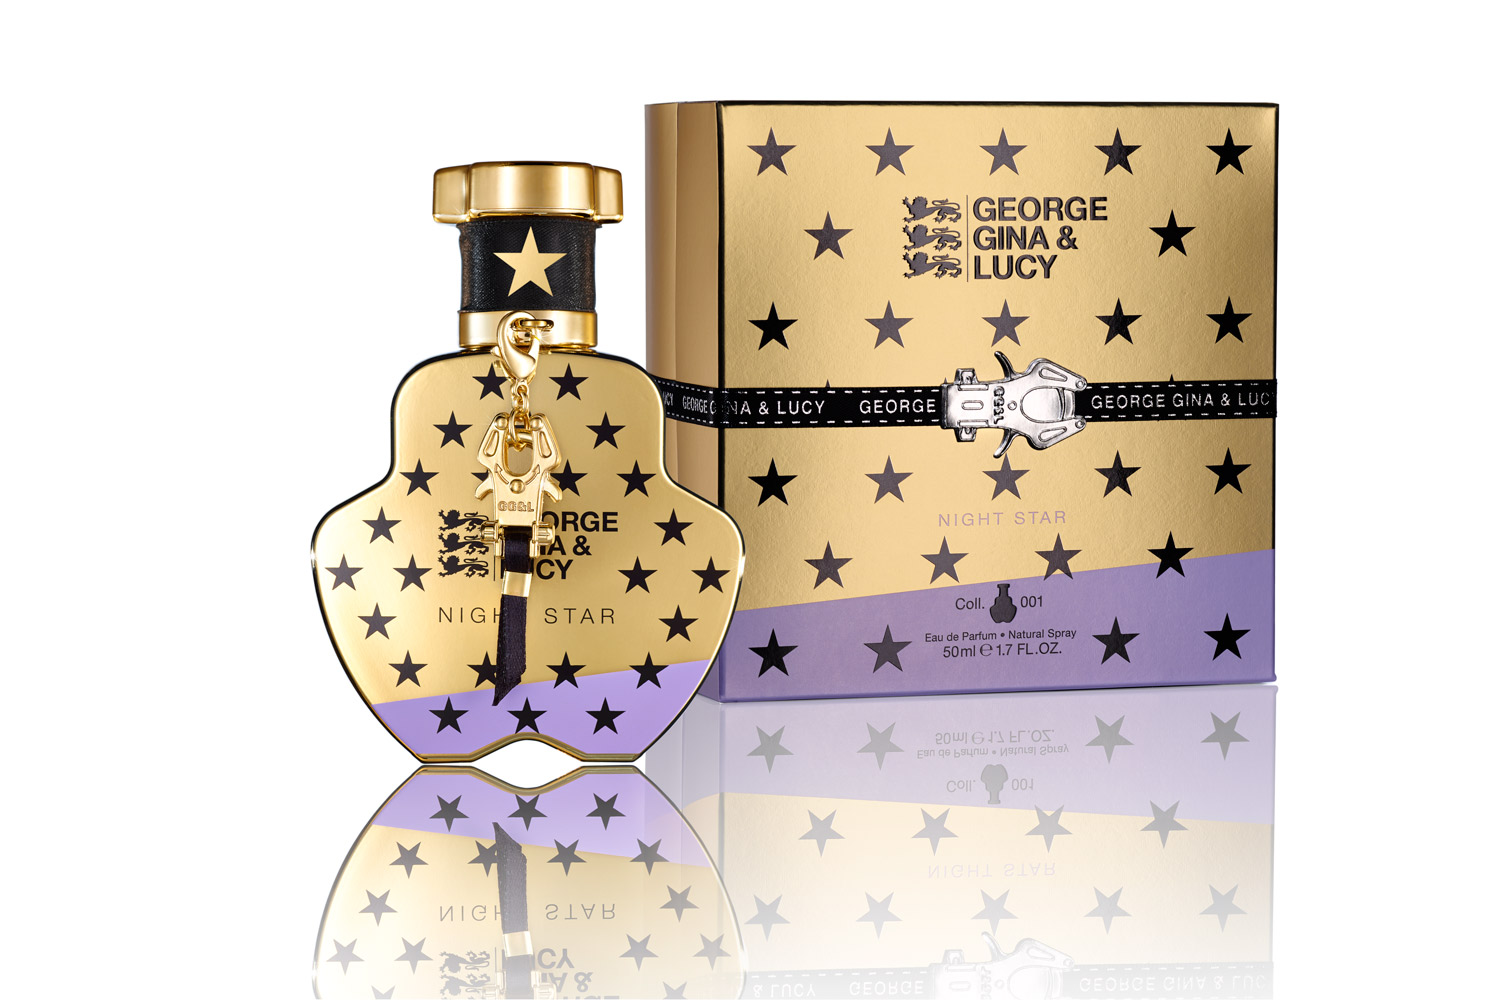 George, Gina & Lucy, New Fragrance